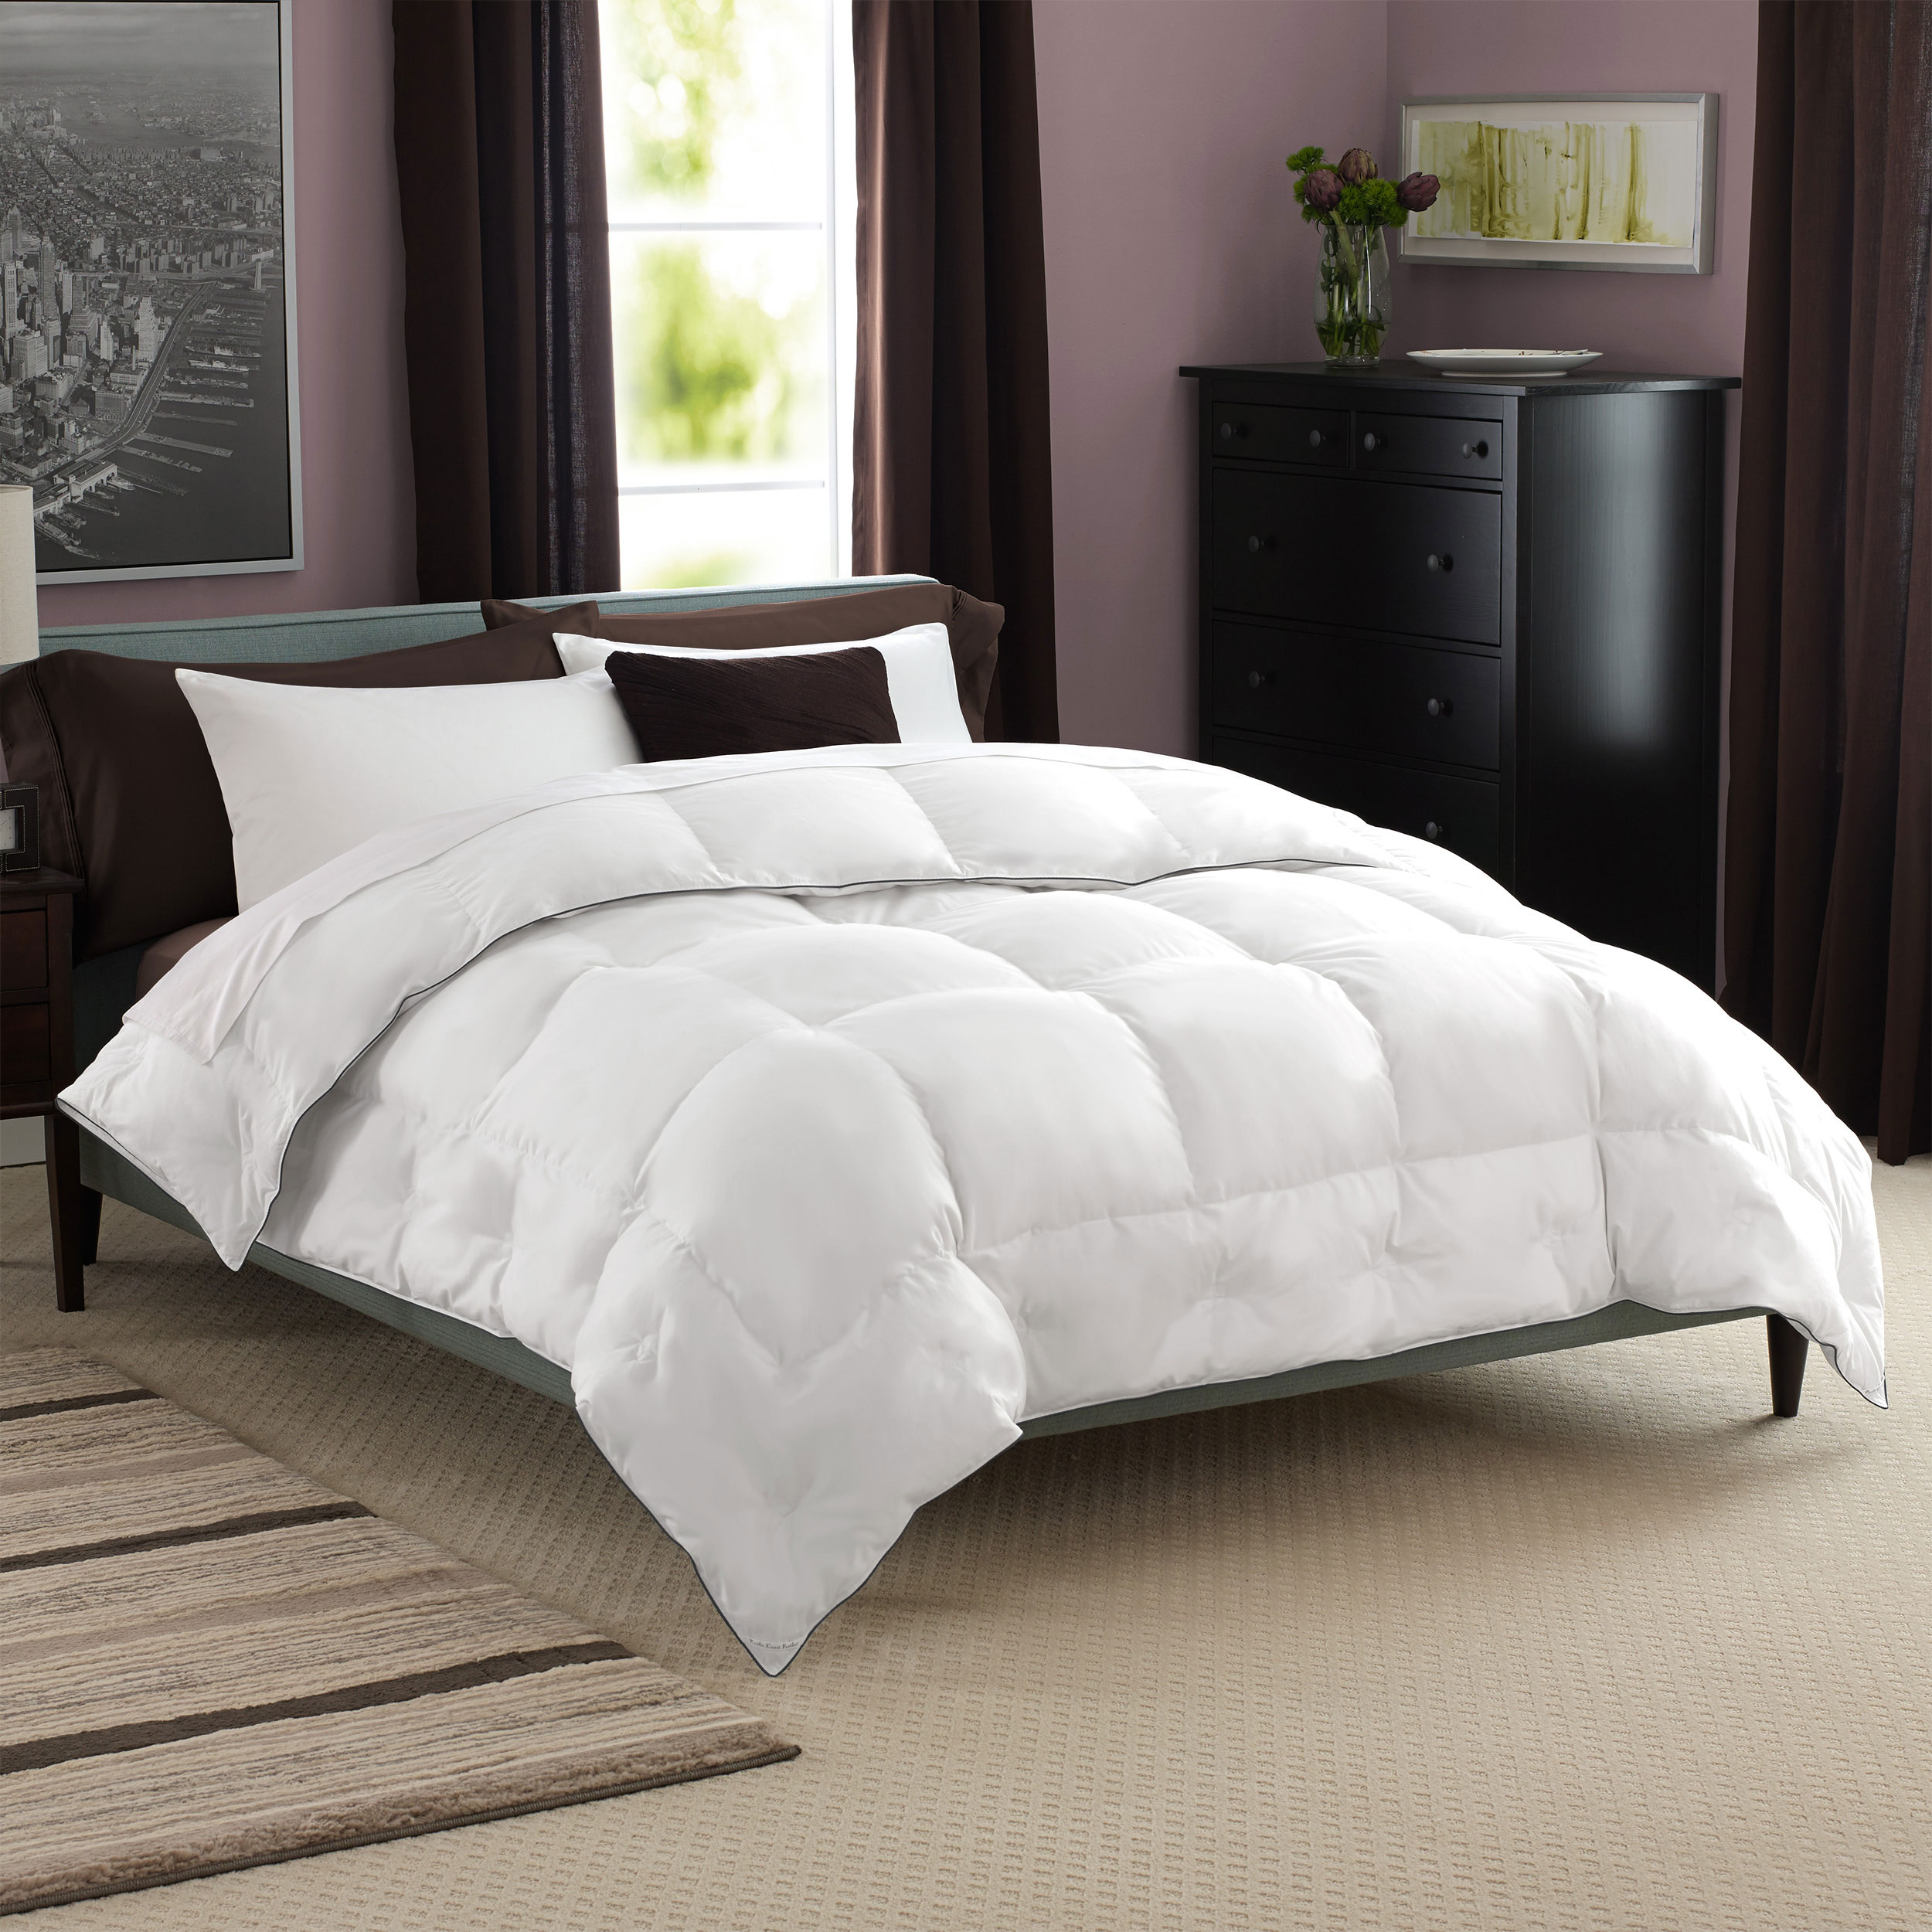 Pacific Coast Ultimate Extra Warmth Comforter 500 Thread Count 600 Fill Power Down - Twin